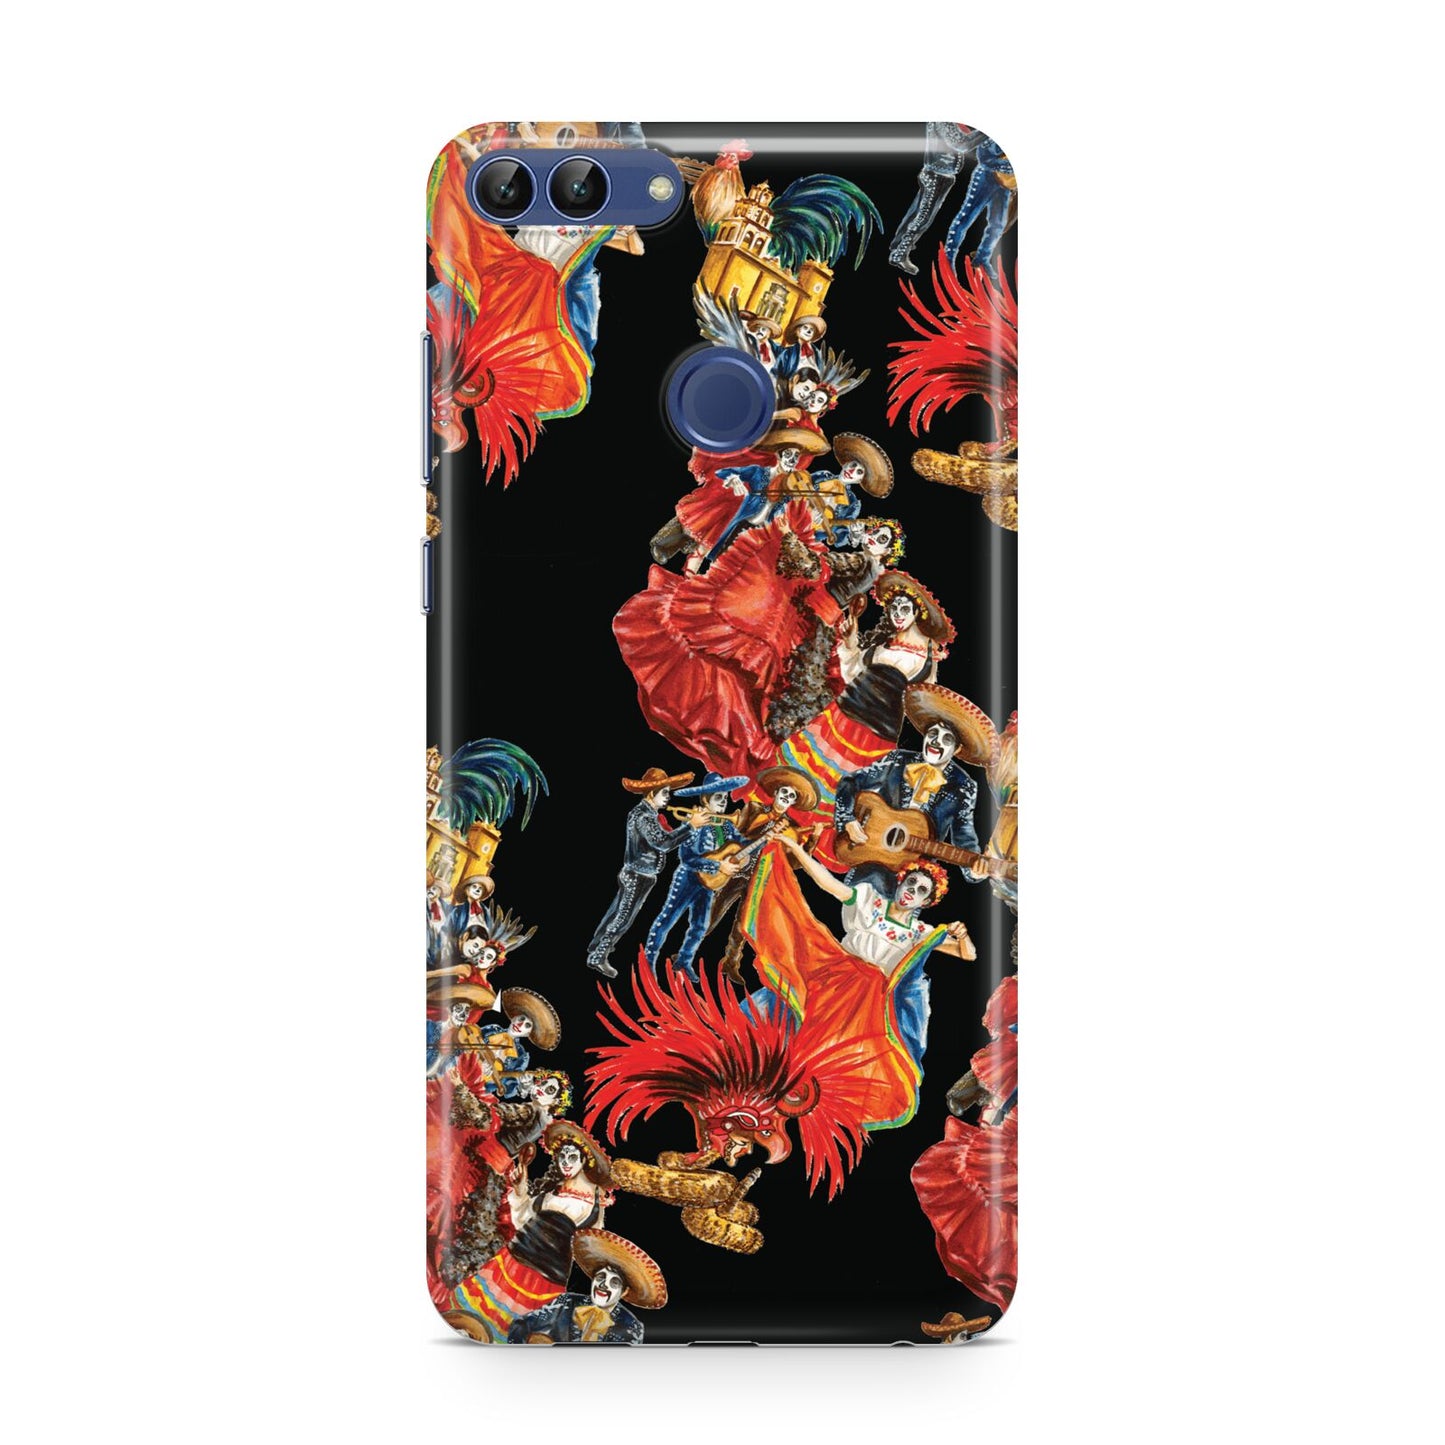 Day of the Dead Festival Huawei P Smart Case